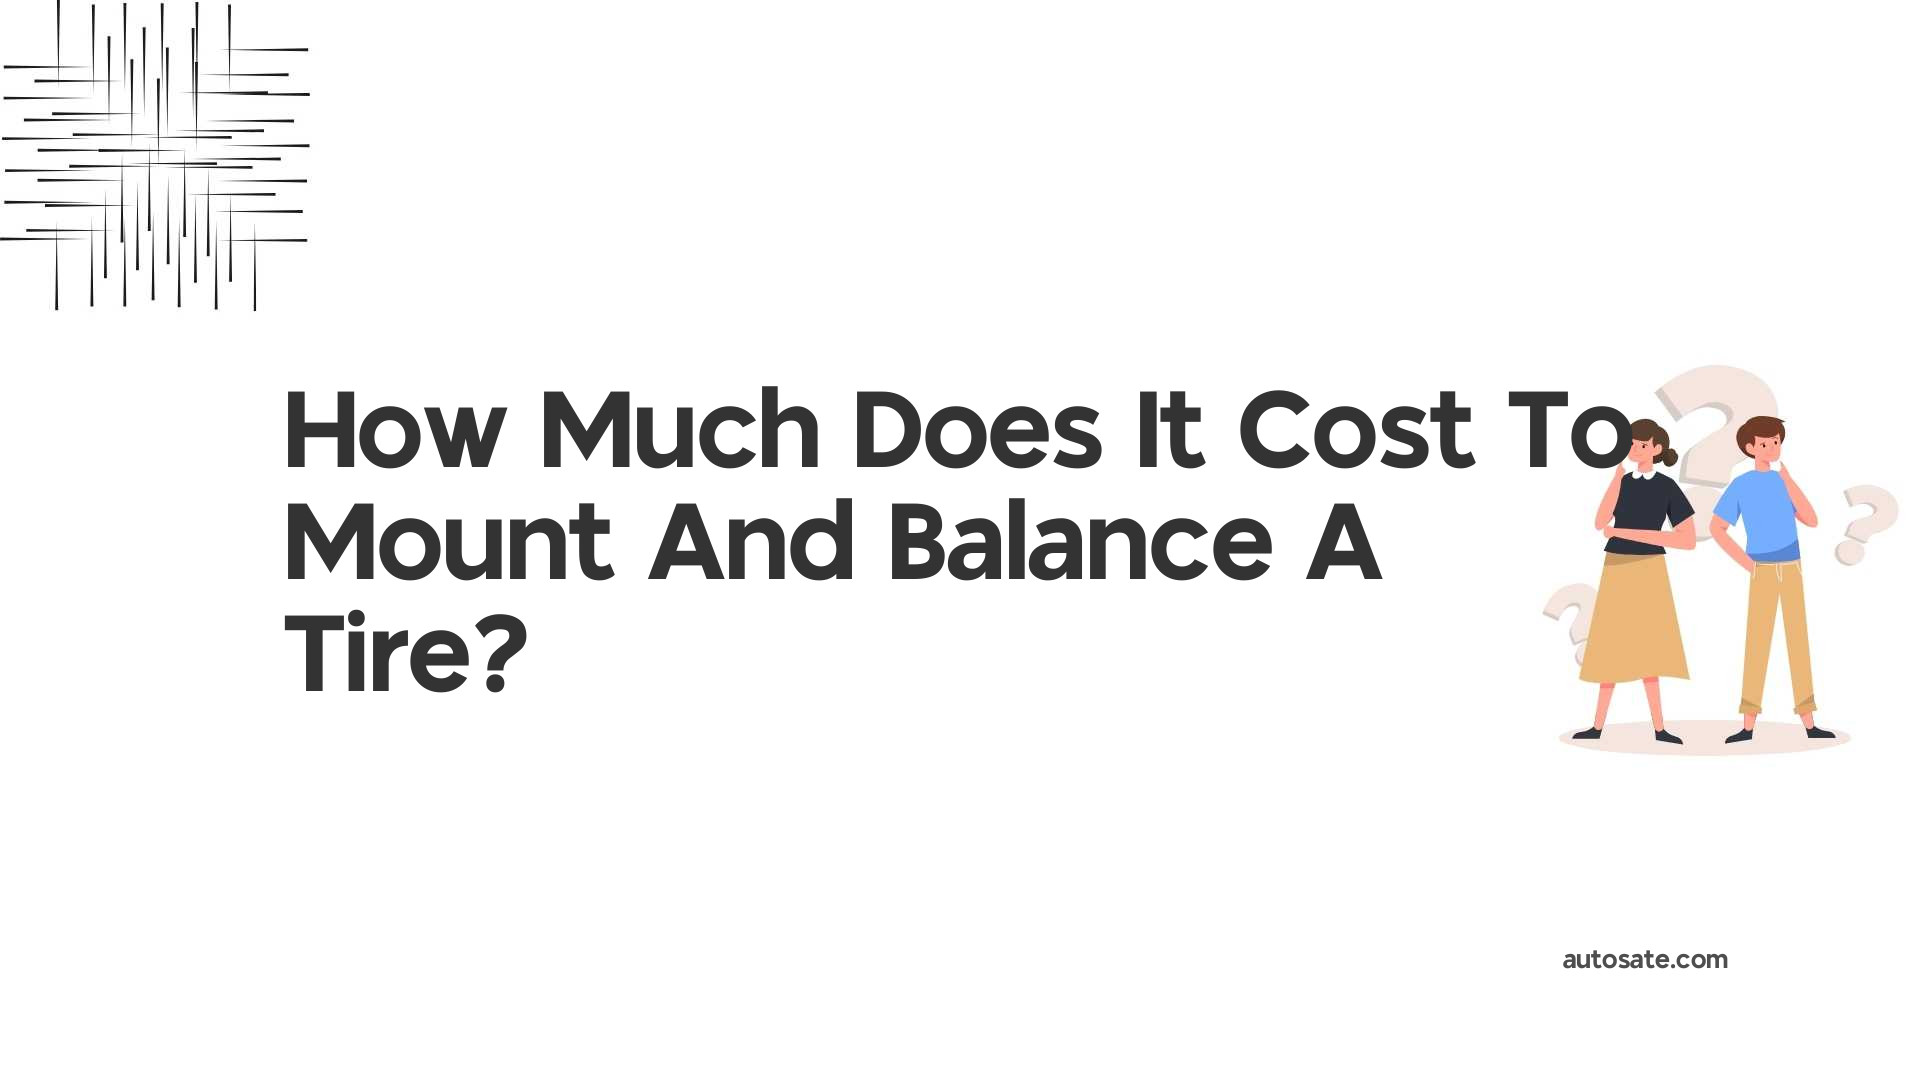 How Much Does It Cost To Mount And Balance A Tire?